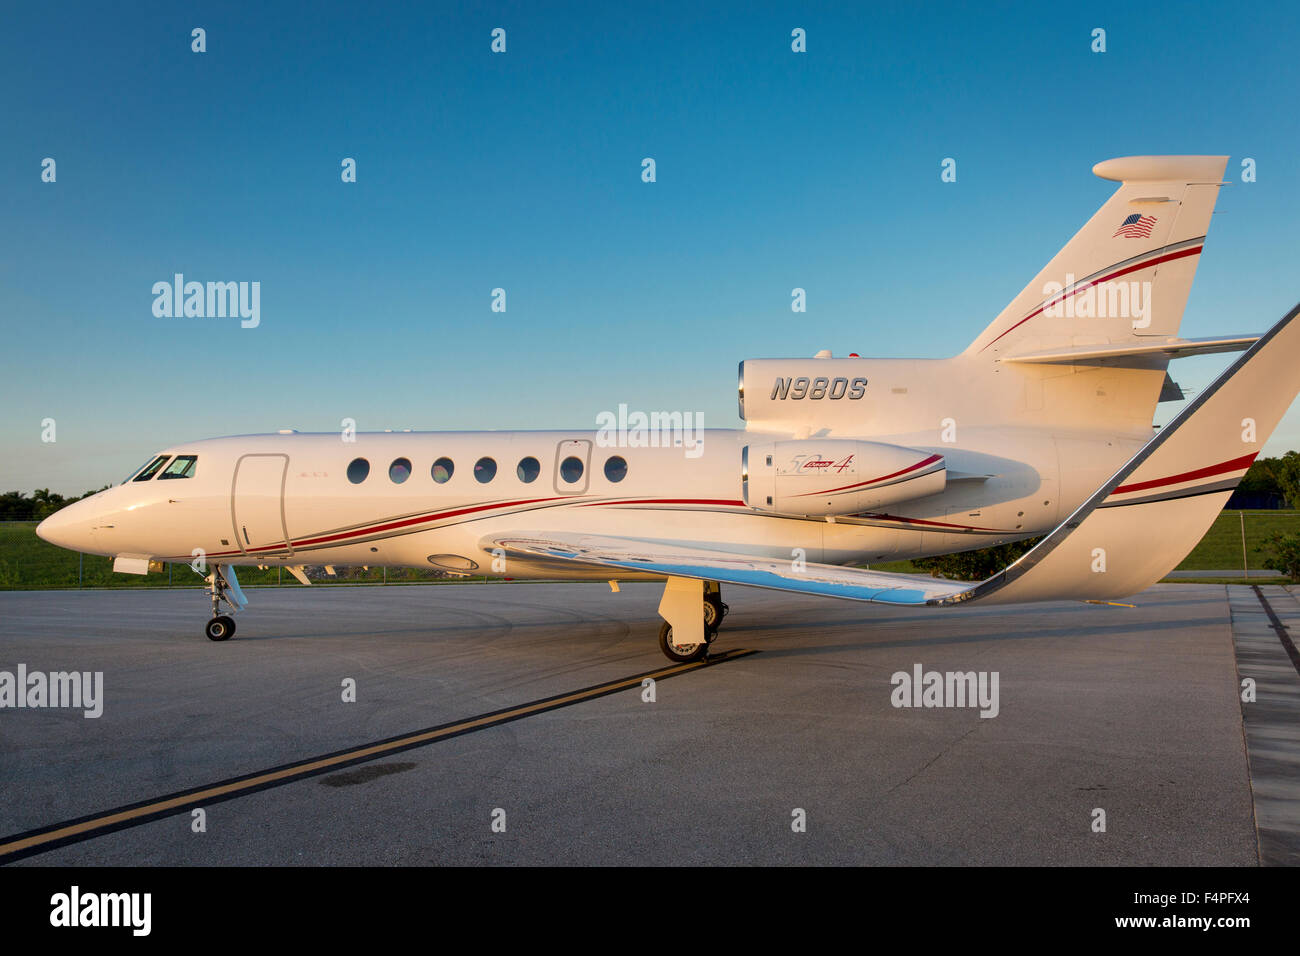 Dassault Falcon 50 jet aircraft parked in Naples, Florida, USA Stock Photo